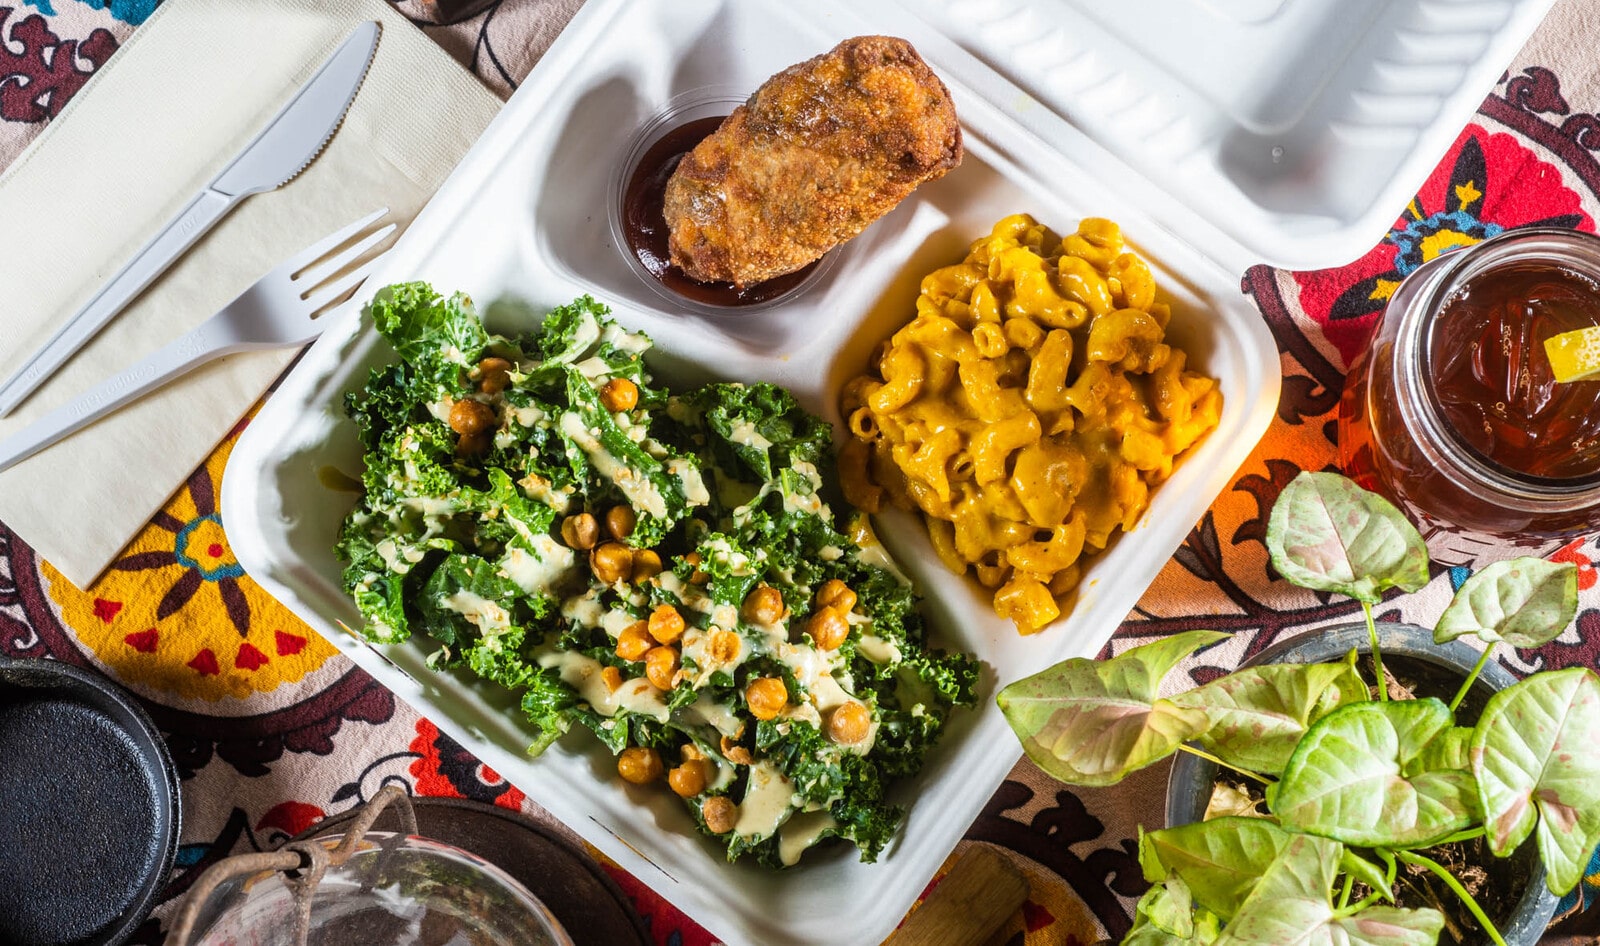 The Best Vegan Soul Food Is in North Carolina, According to Yelp